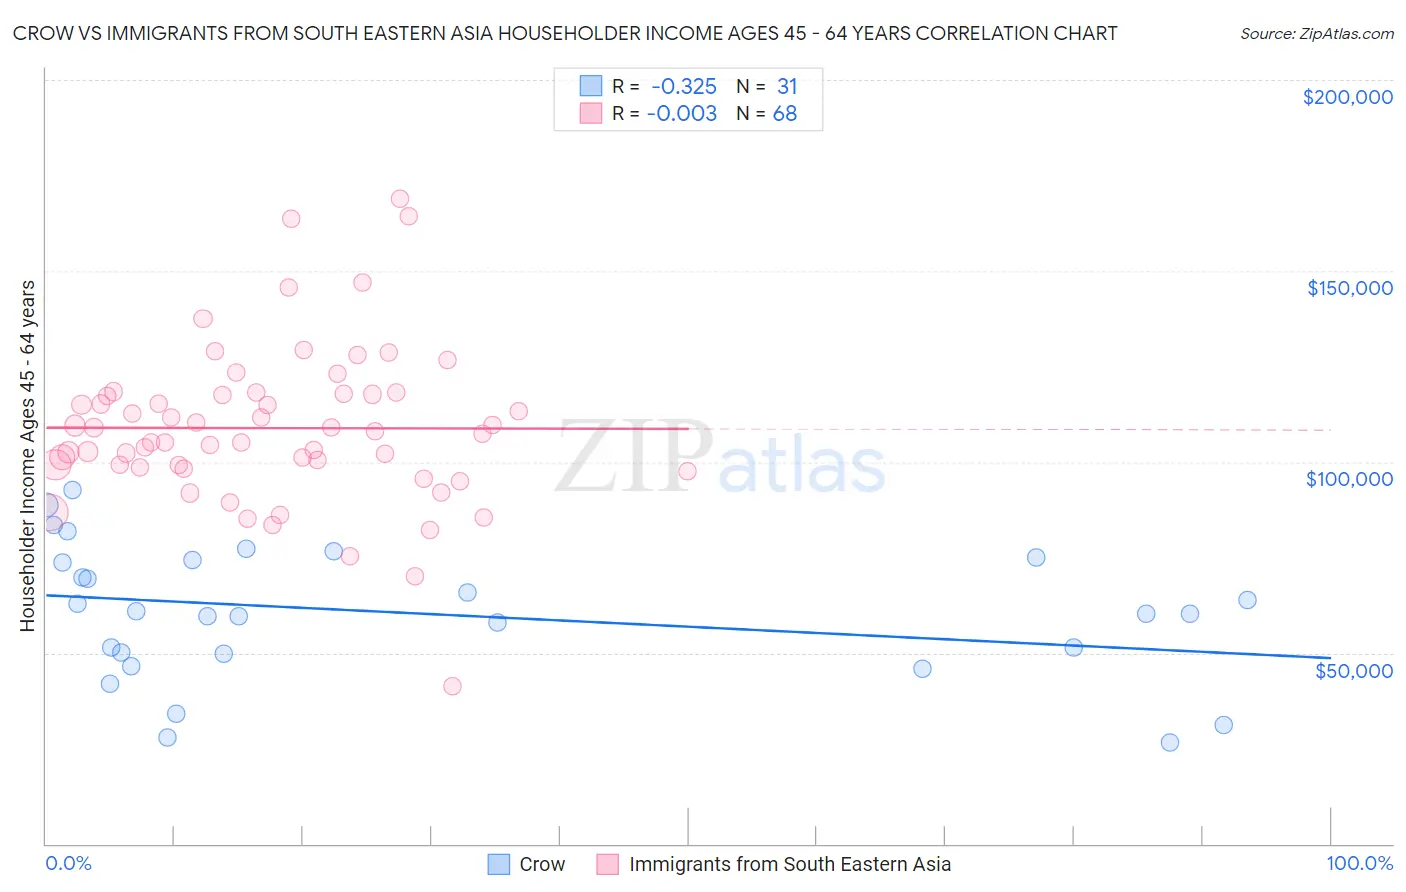 Crow vs Immigrants from South Eastern Asia Householder Income Ages 45 - 64 years